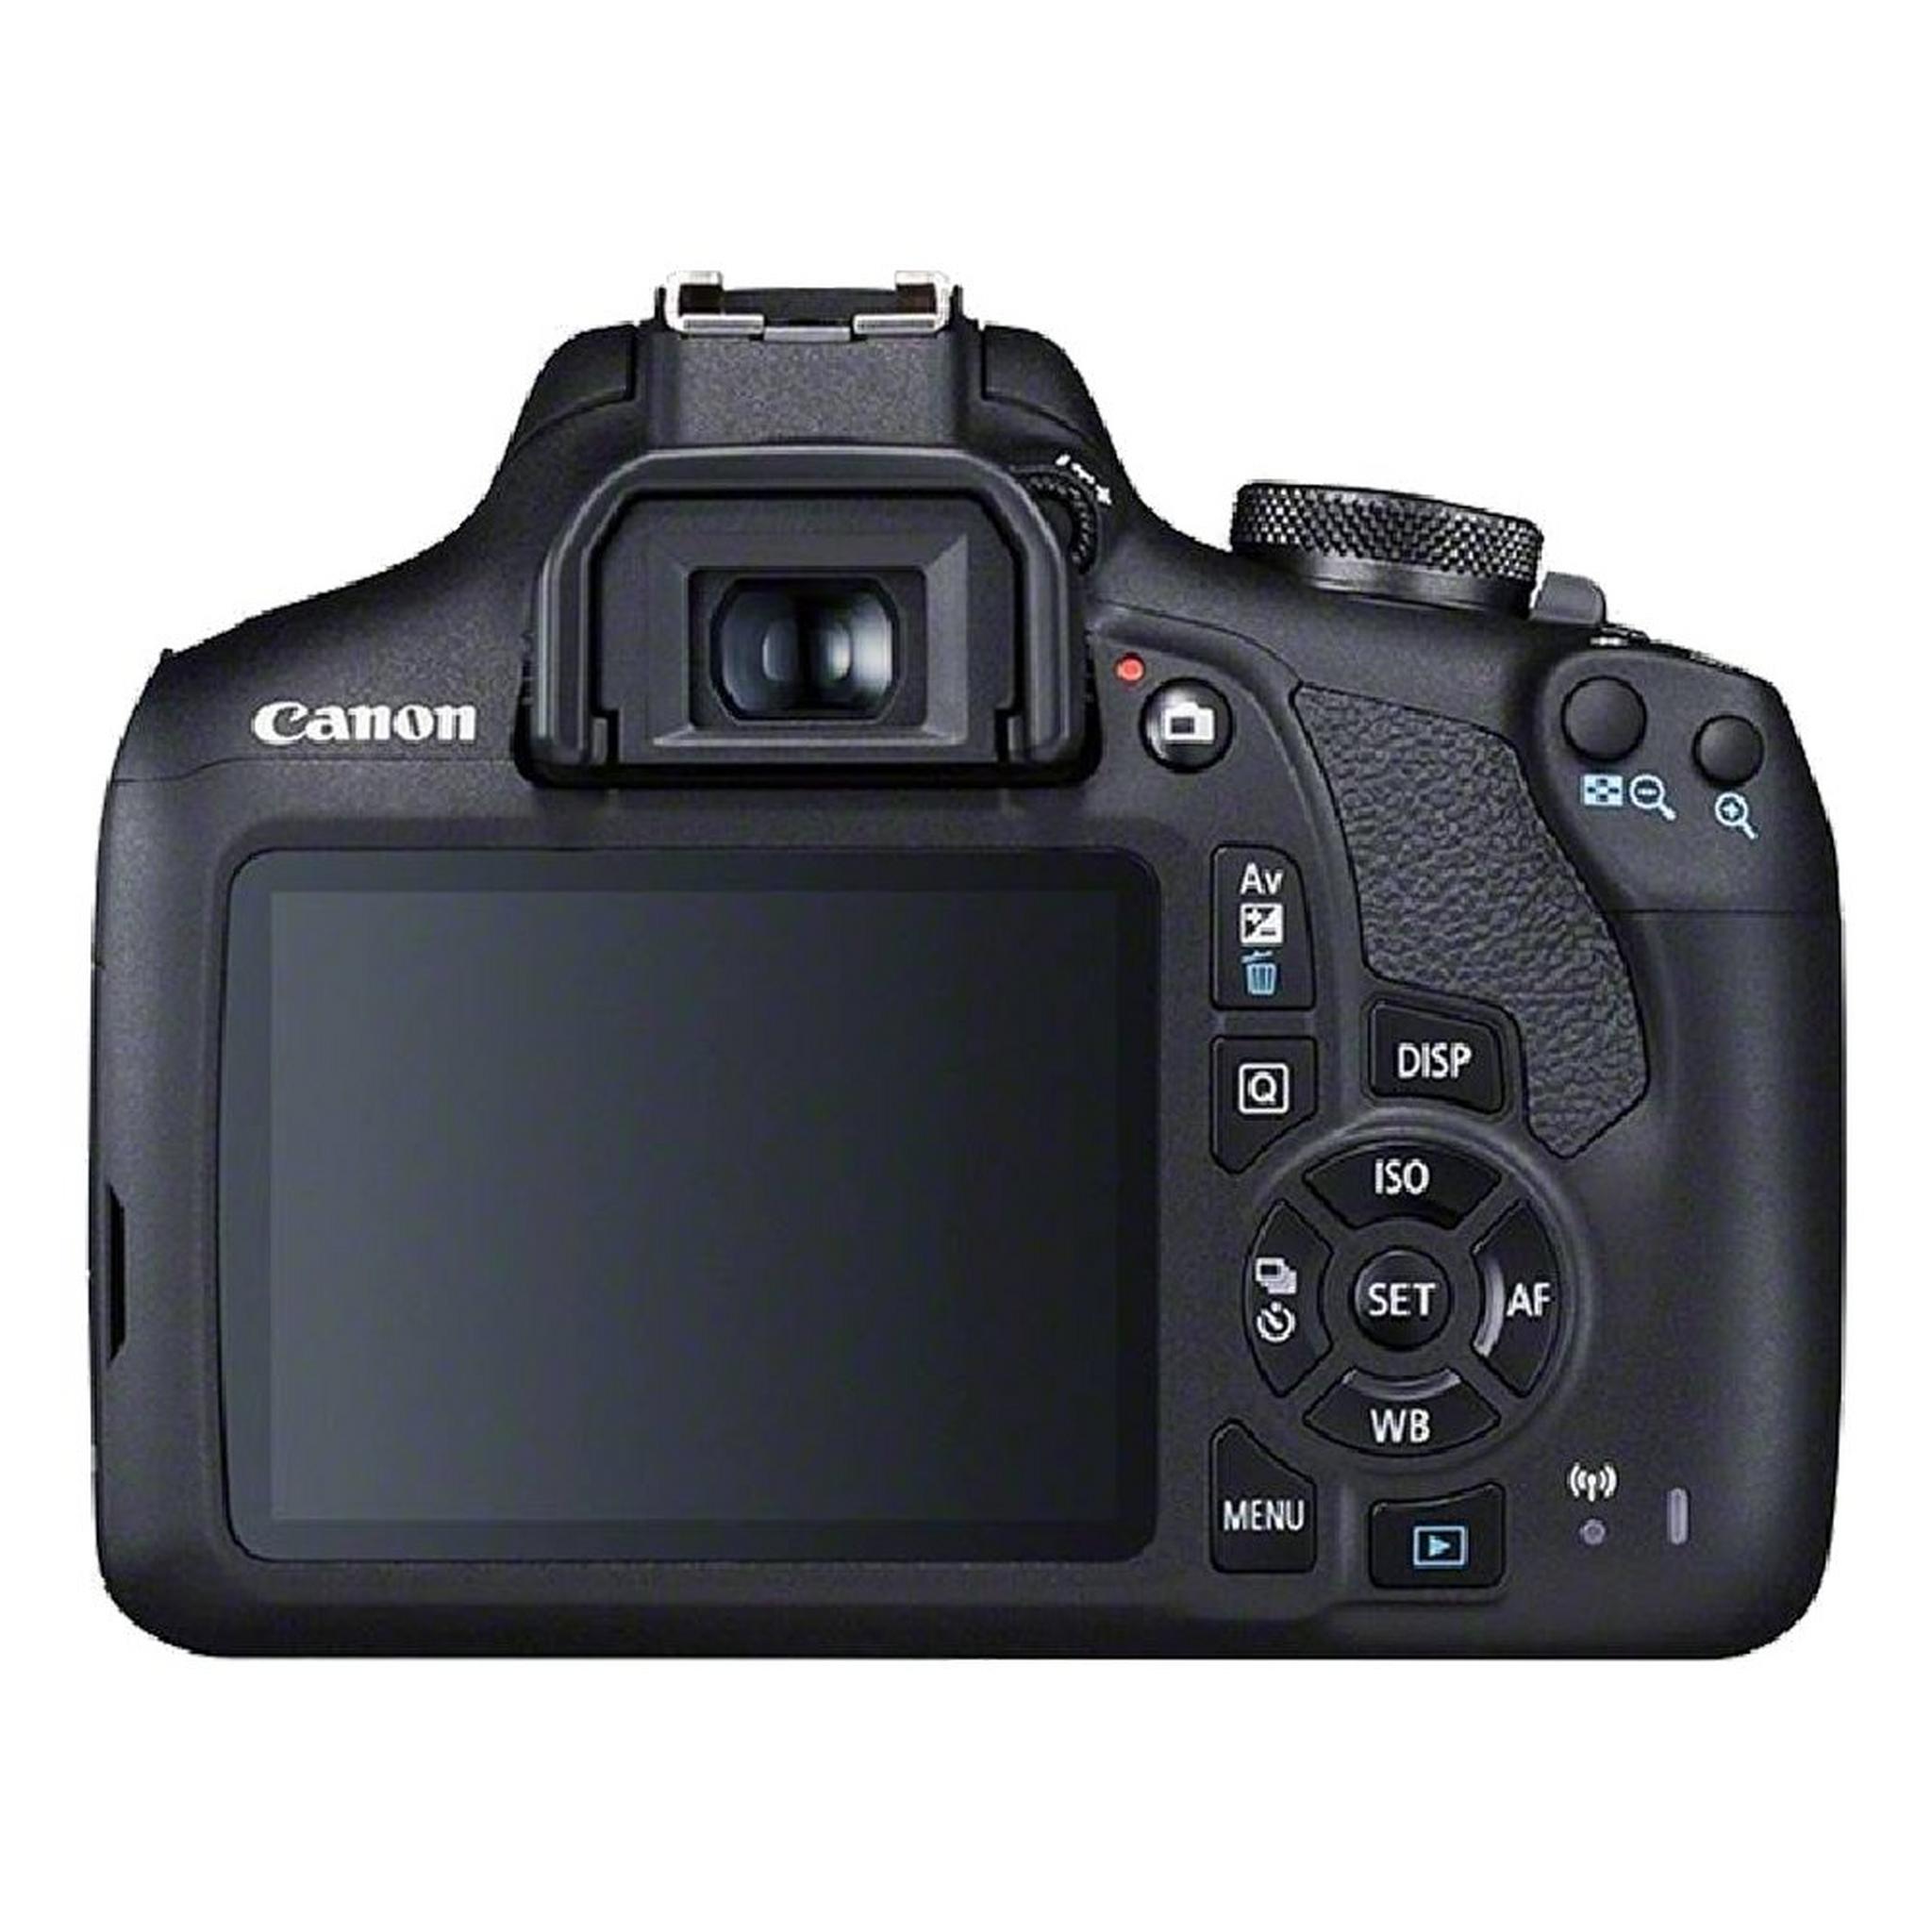 Canon EOS 2000D DSLR Camera with EF 50 18-55mm Lens + EF 50 1.8 S CME Lens